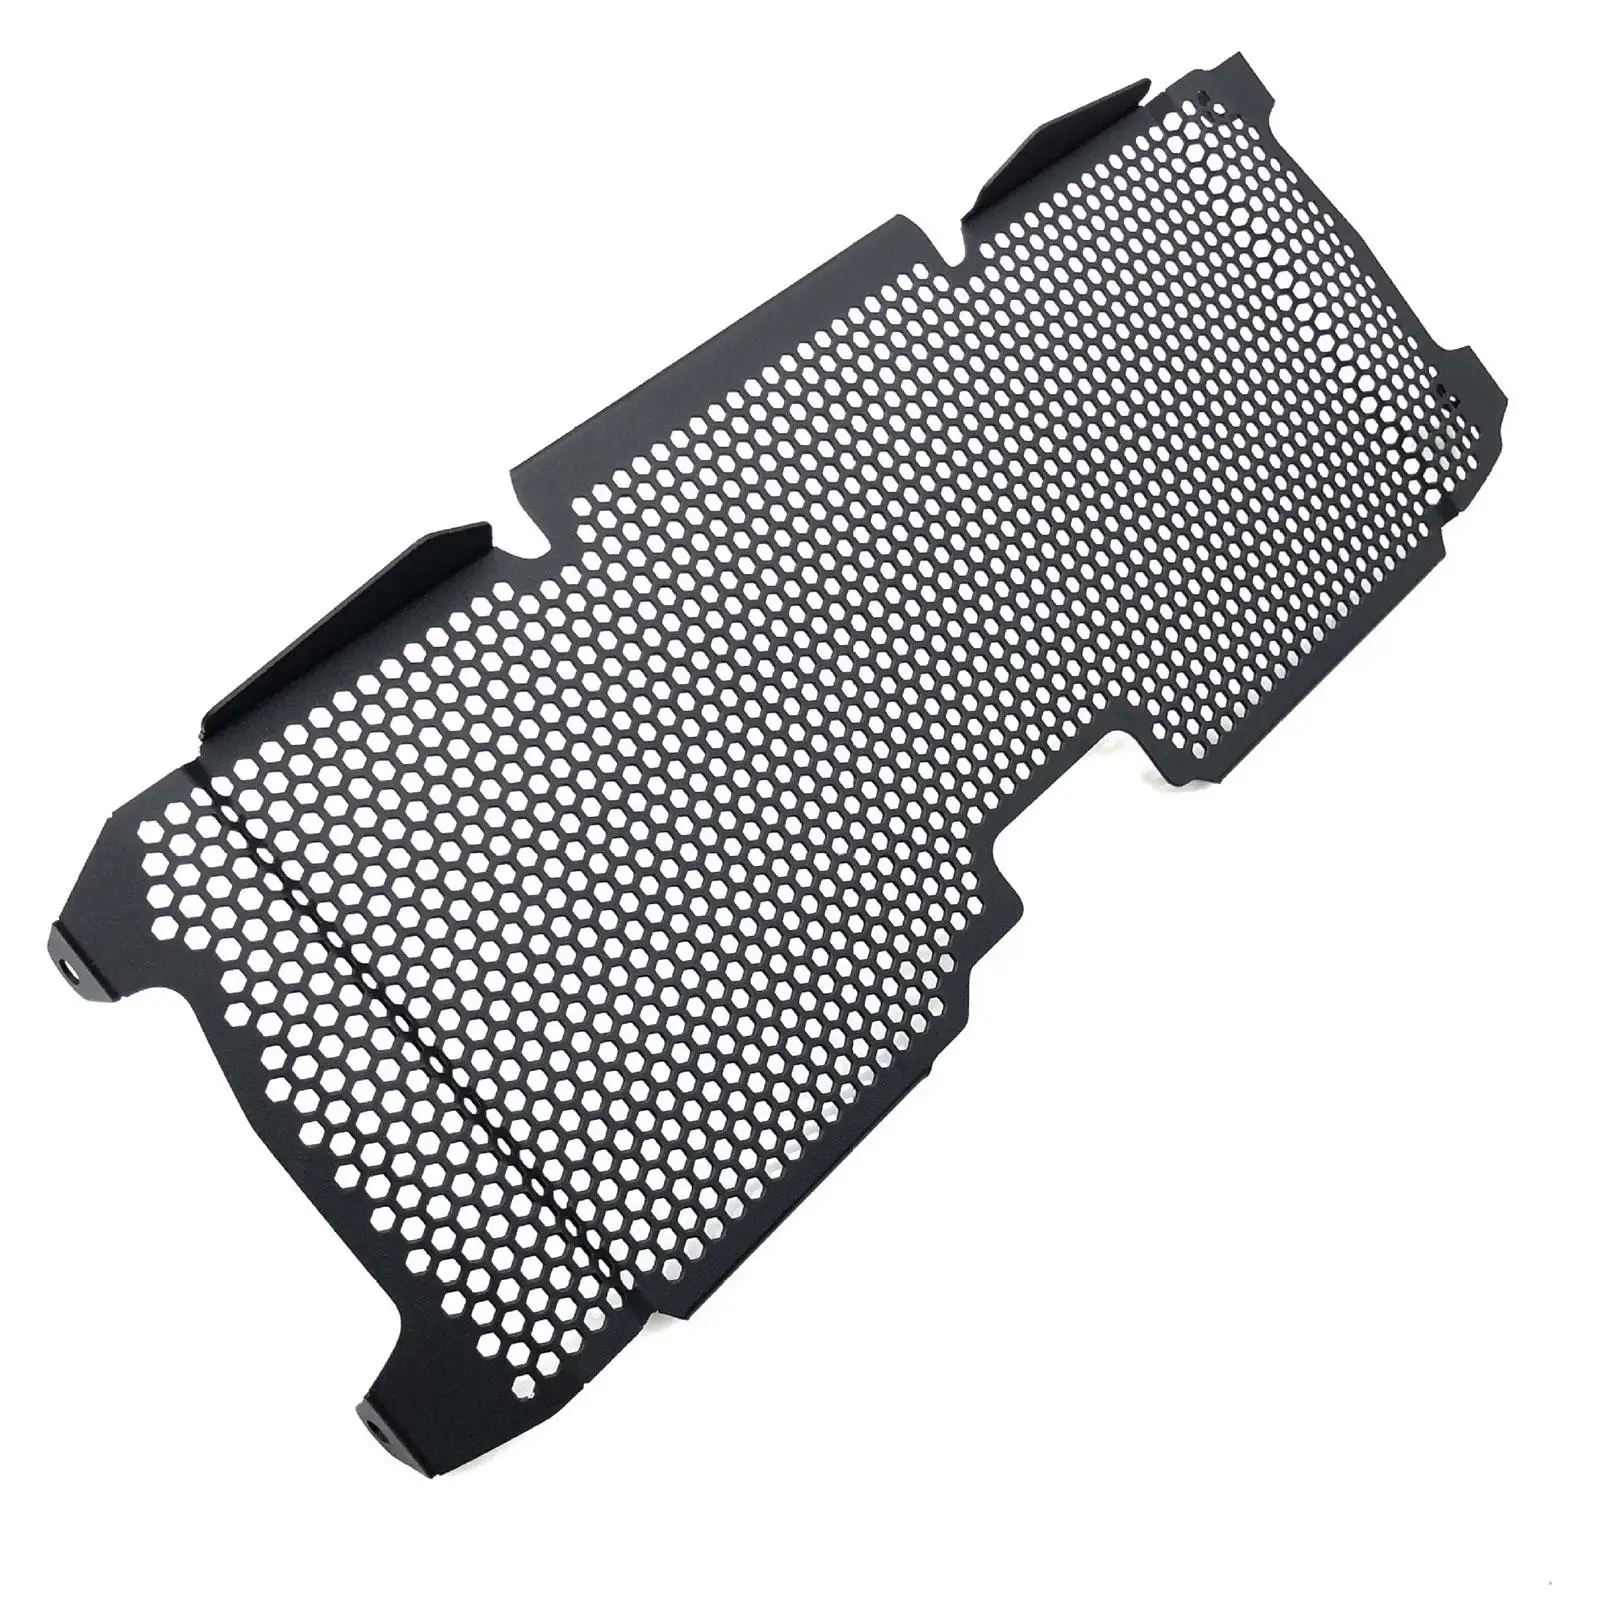 Radiator Grille Guard Protector Grill Cover, Accessory Decoration Replaces,